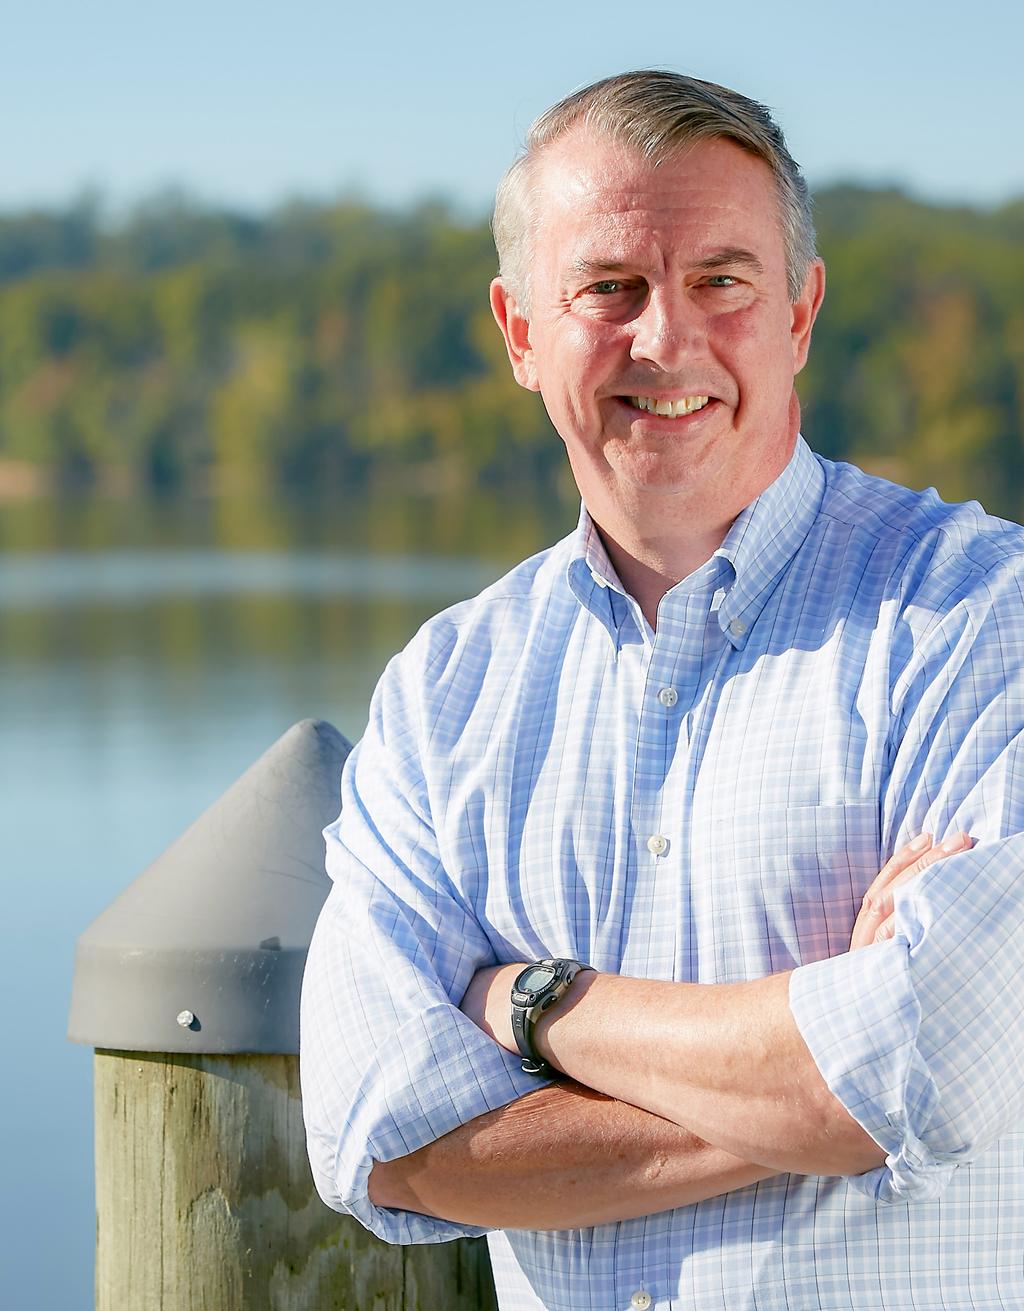 ED GILLESPIE S PLEDGE I will be an honest, ethical,